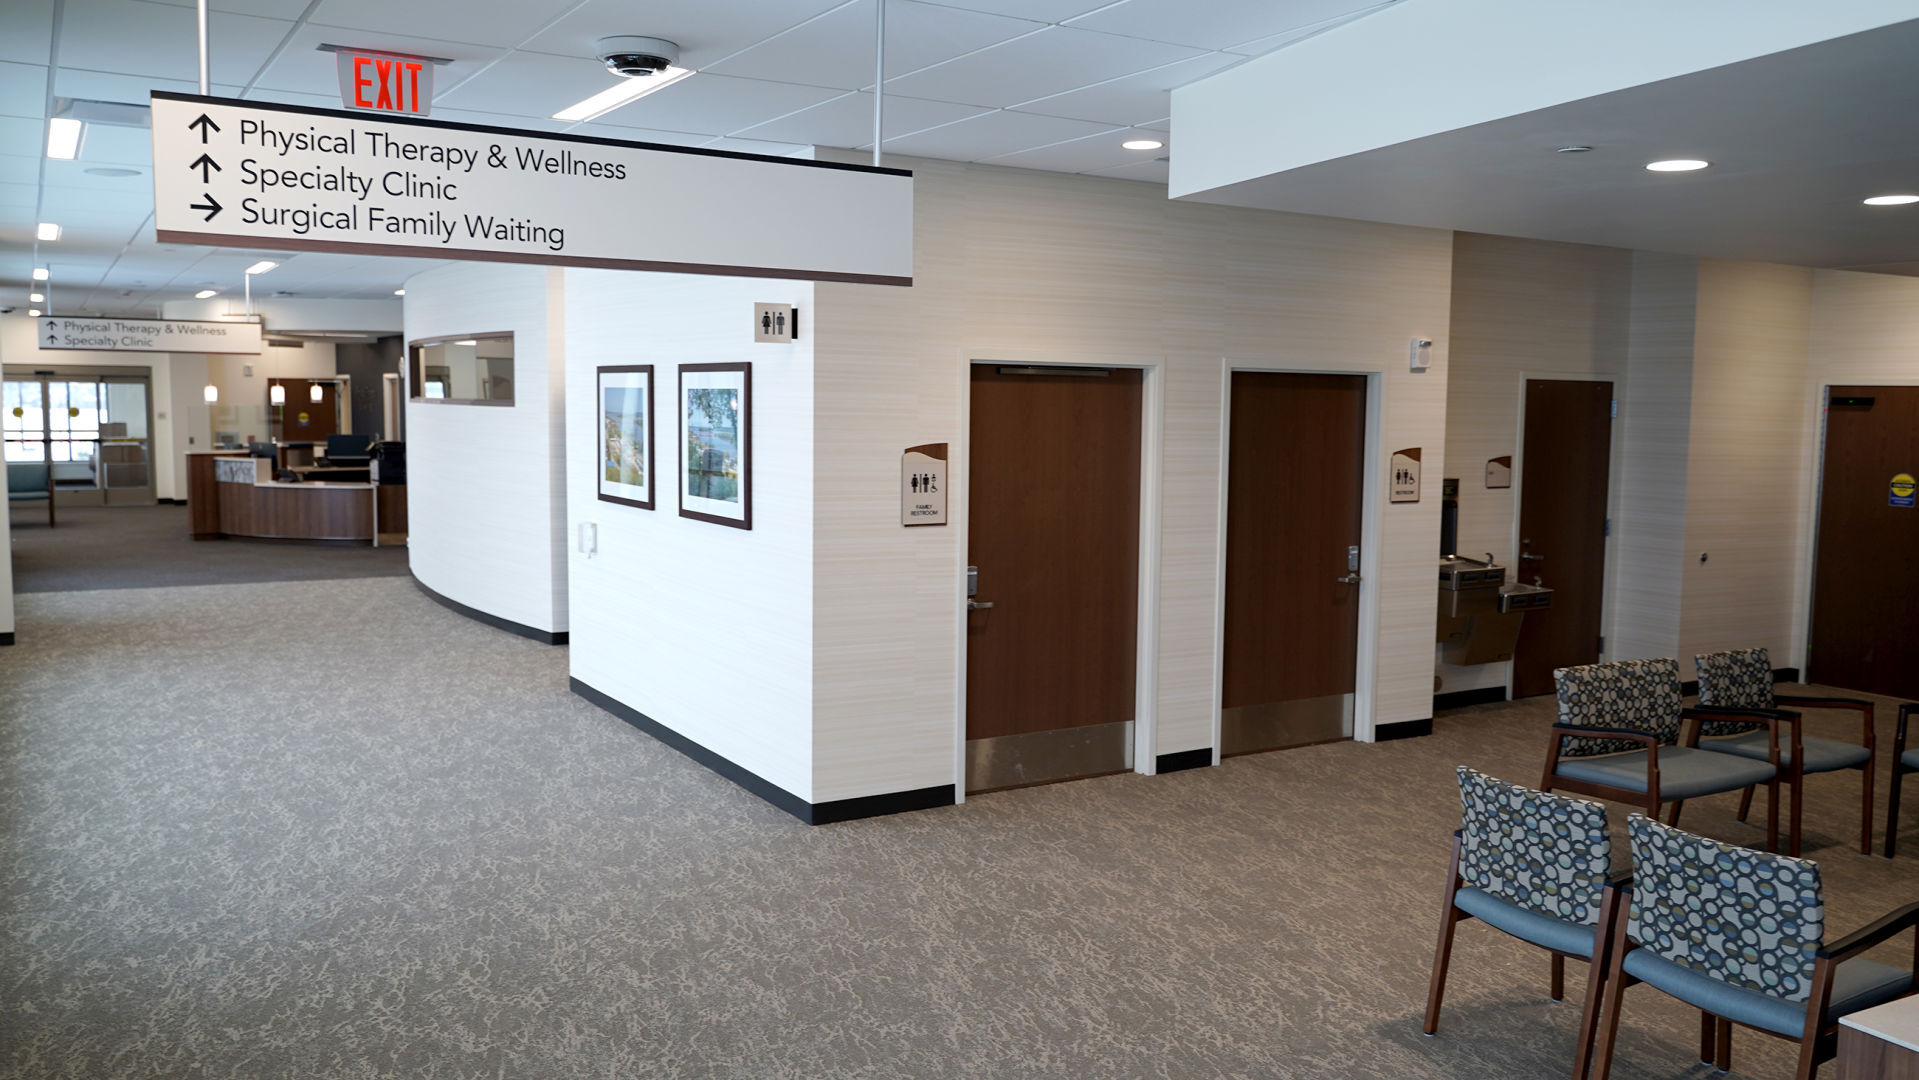 The interior of the new Jackson County Regional Health Center in Maquoketa, Iowa, which is expected to open early next month. Photo taken on Friday, Feb. 12, 2021. PHOTO CREDIT: Paul Kurutsides